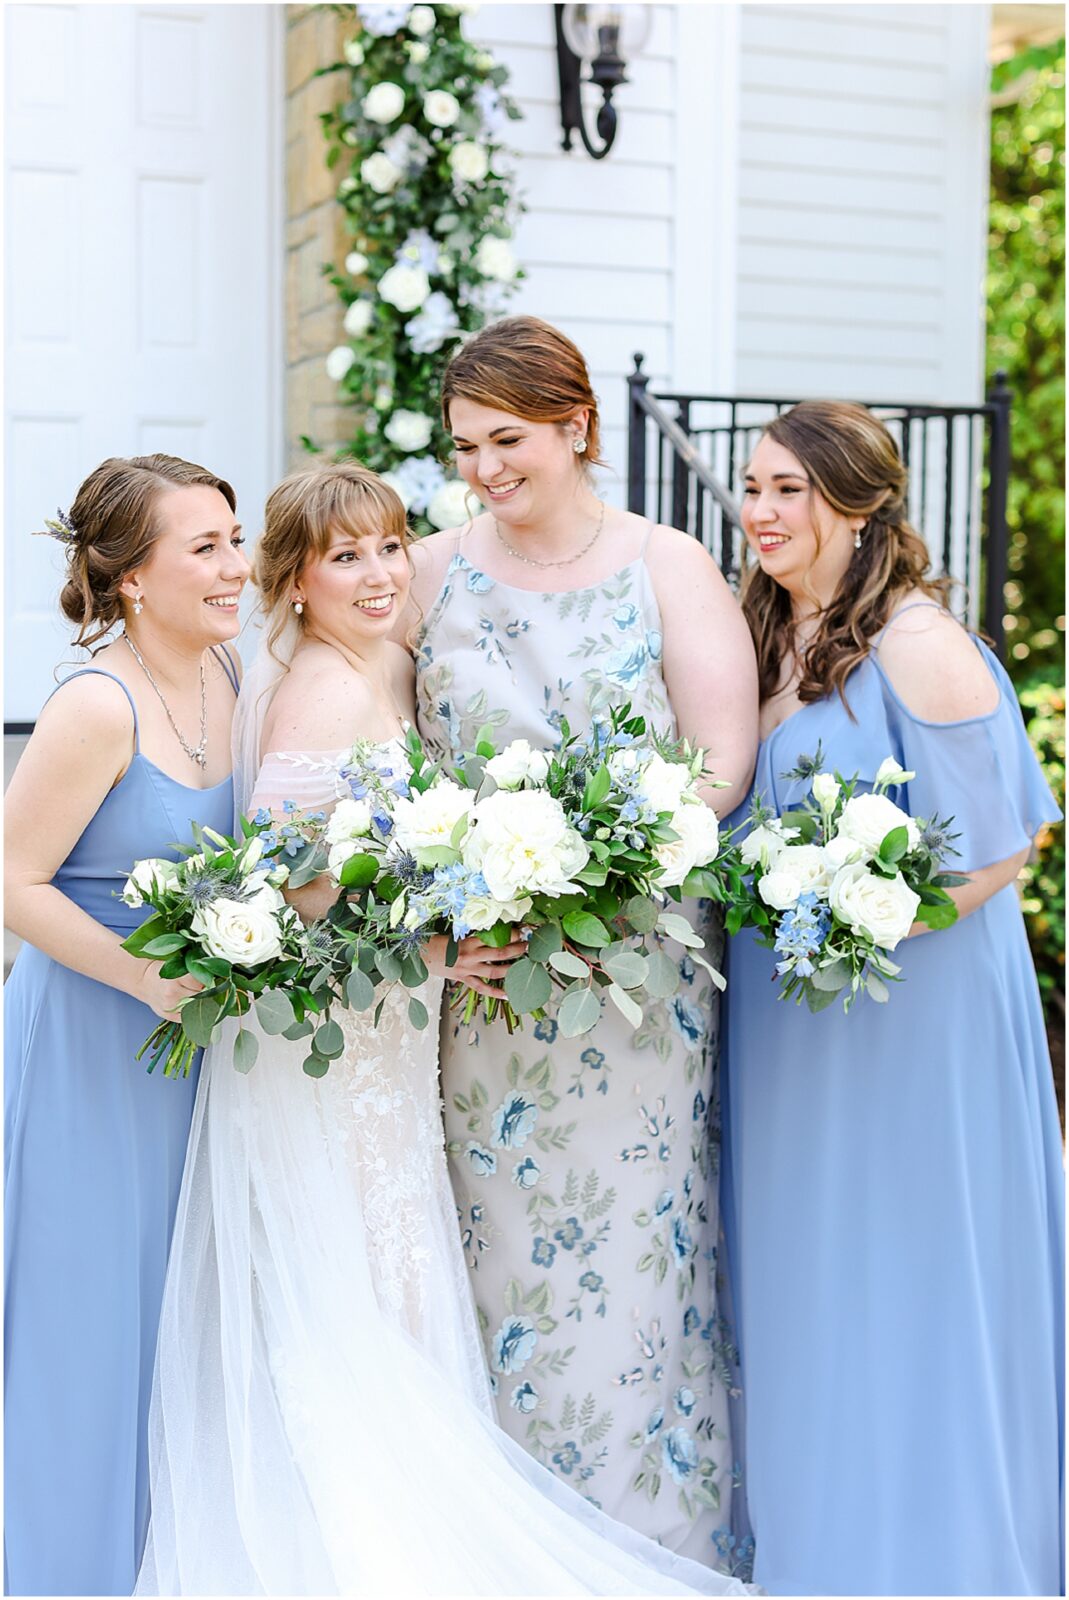 happy bridal party photos at the hawthorne house with blue and white flowers and theme - kansas city wedding photographer mariam saifan